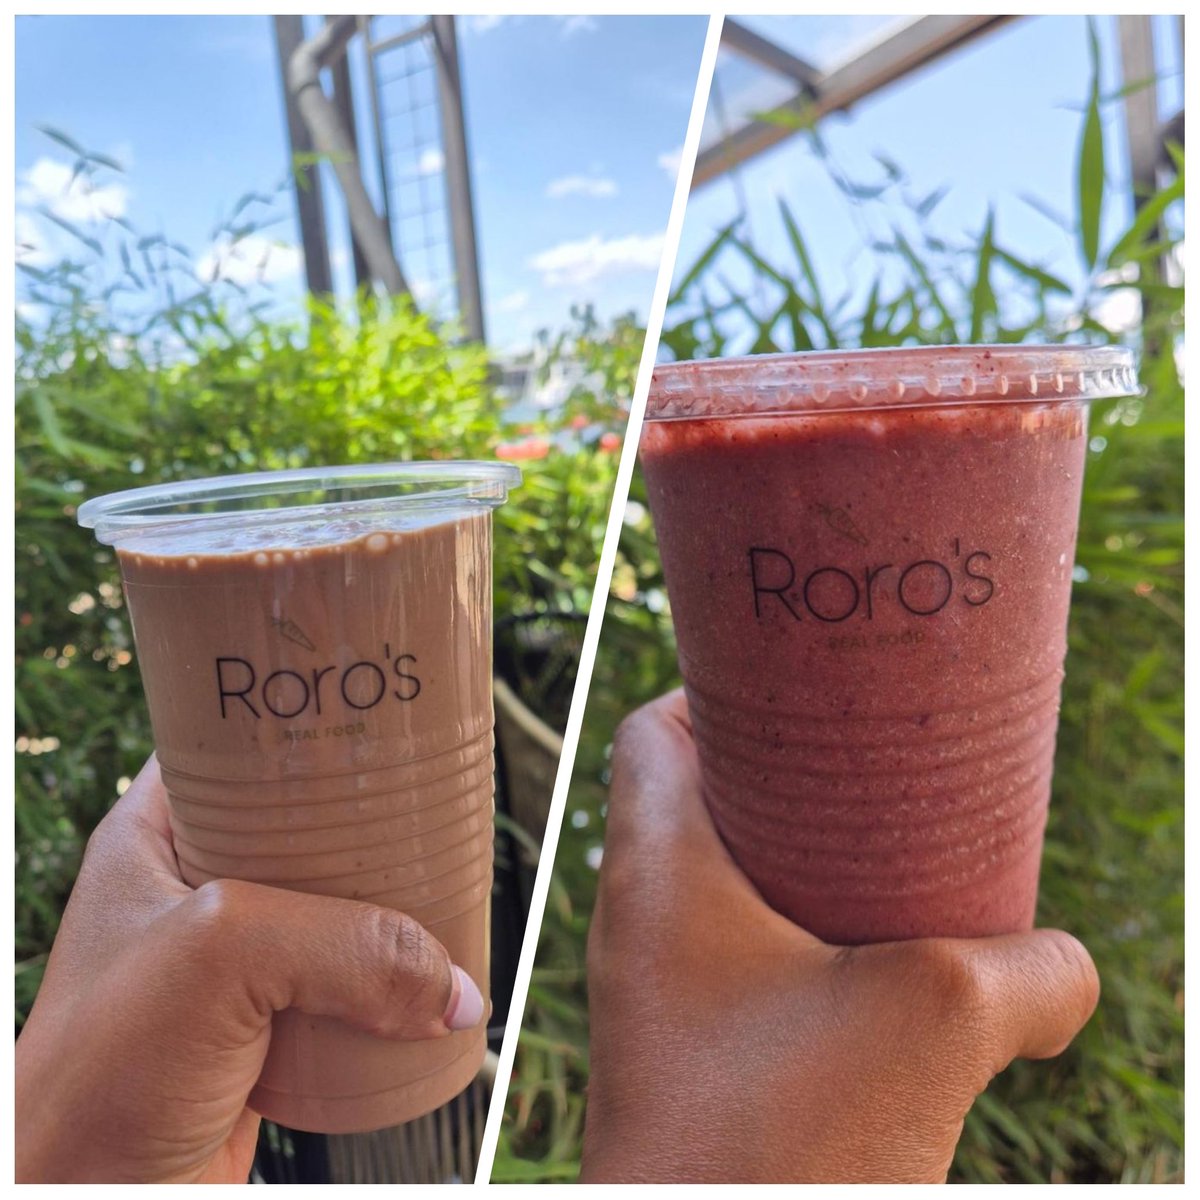 Cheers to the weekend!

Nothing beats a smoothie on a Saturday to power through those weekend errands. 
Grab one, @roros.ke, and thank us later!
#Smoothies #Healthylifestyle #Healthyeating #Glutenfree #RealFood #HealthyFood #Foodie #SaturdayTreats #RorosWaterfront 
#YouveArrived